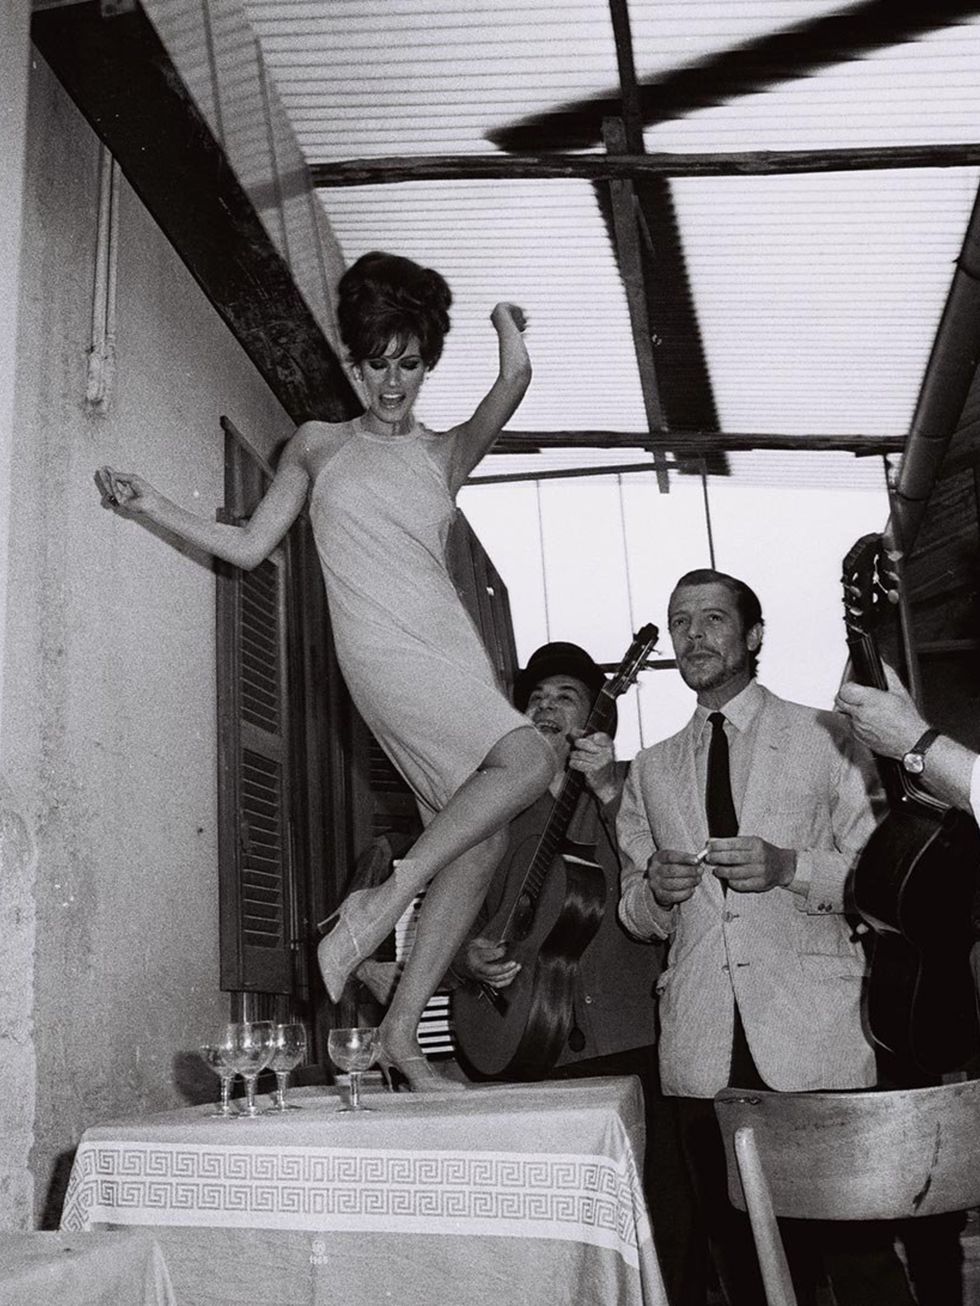 &lt;p&gt;&lt;strong&gt;EXHIBITION: &#039;The Years of La Dolce Vita&#039; at the Estorick Collection&lt;/strong&gt;&lt;/p&gt;&lt;p&gt;A little bit of mid-century Rome setting up camp in the heart of London.&lt;/p&gt;&lt;p&gt;This collection of eighty phot